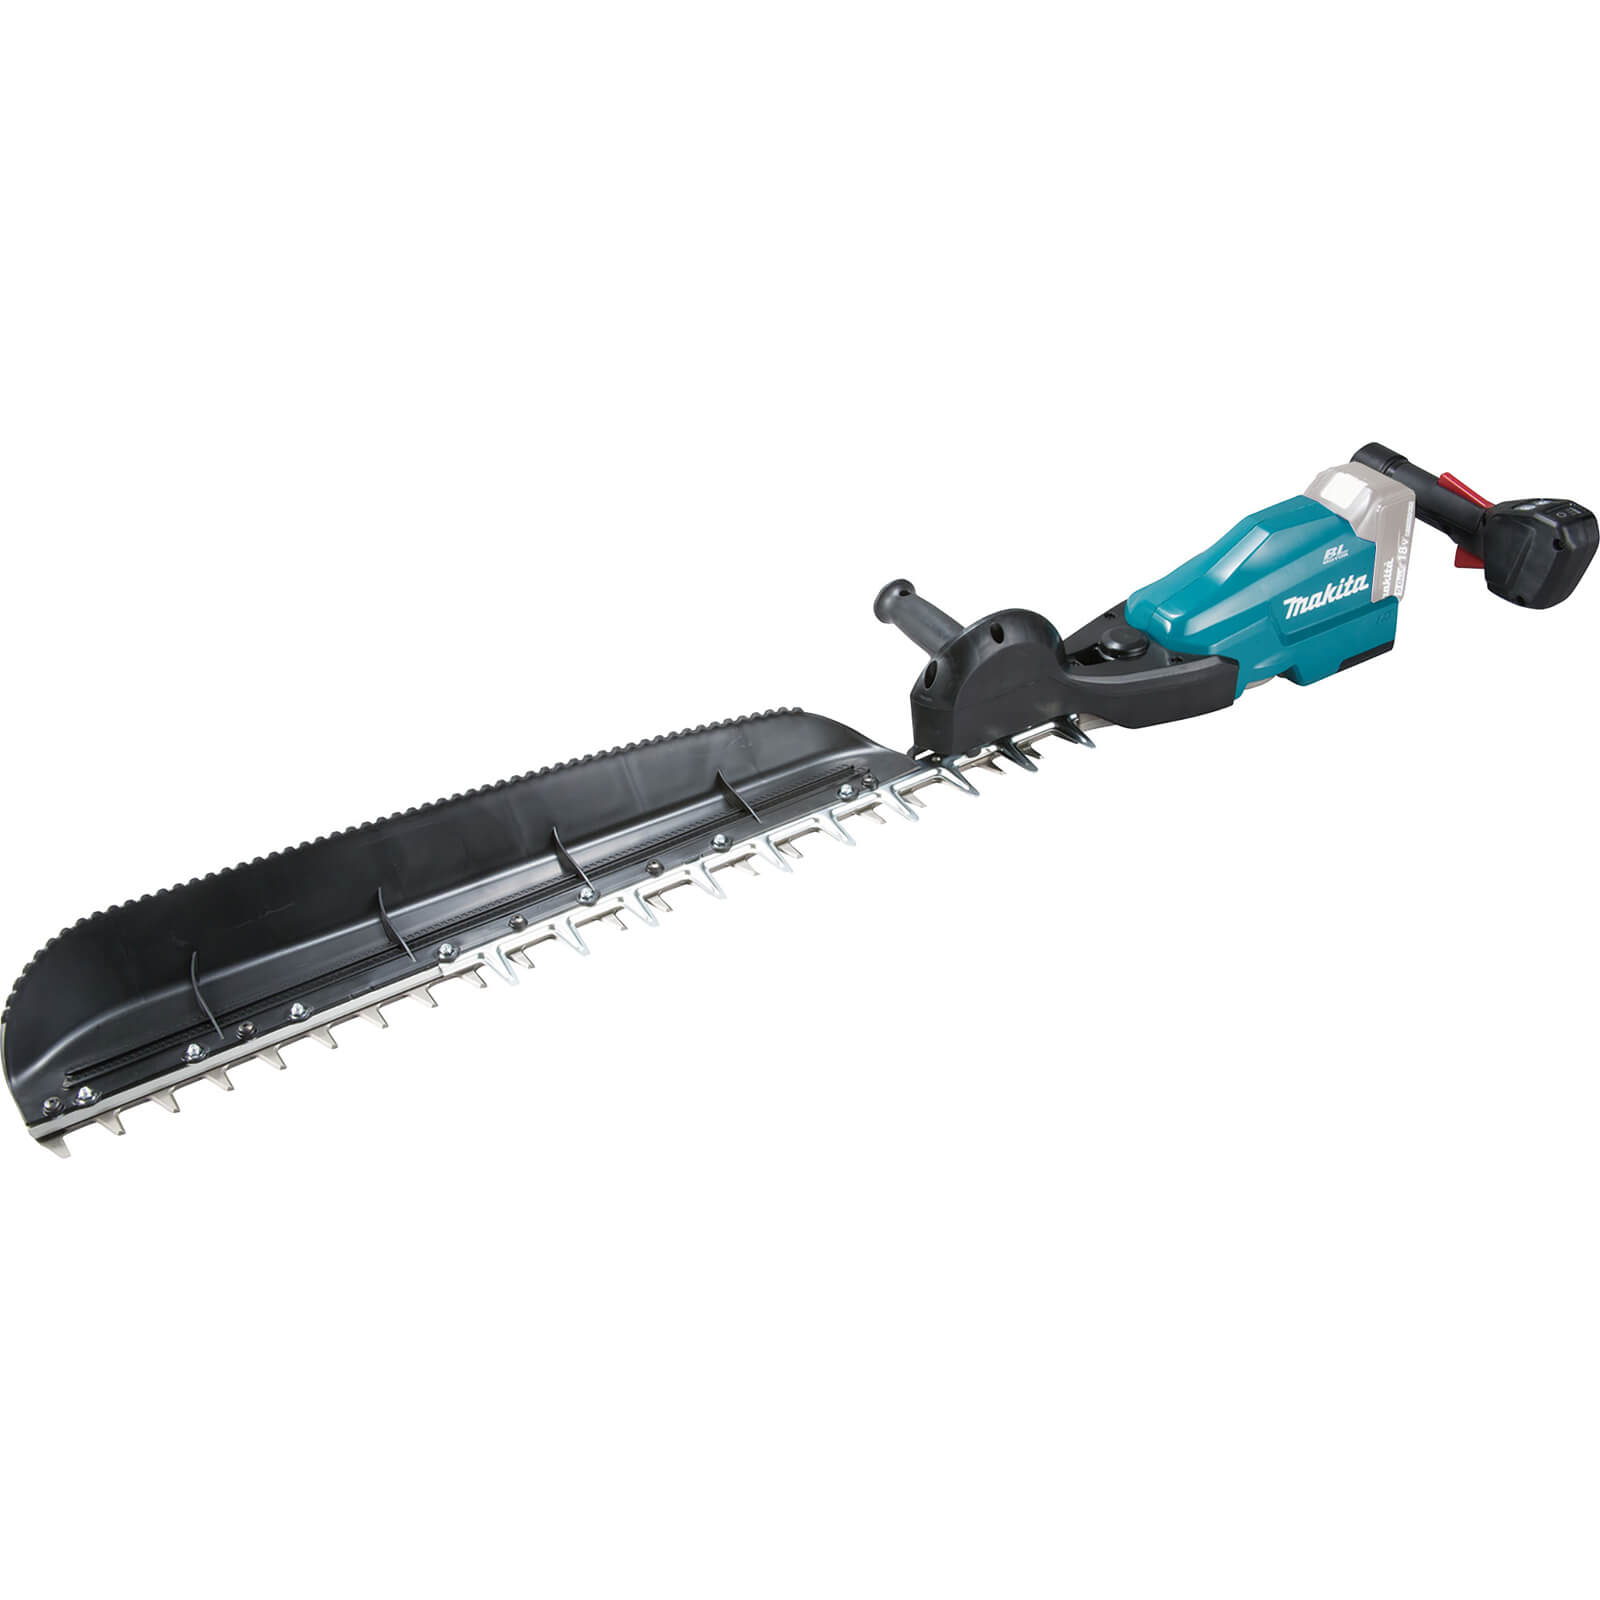 Makita DUH754S 18v LXT Cordless Brushless Hedge Trimmer 750mm No Batteries No Charger